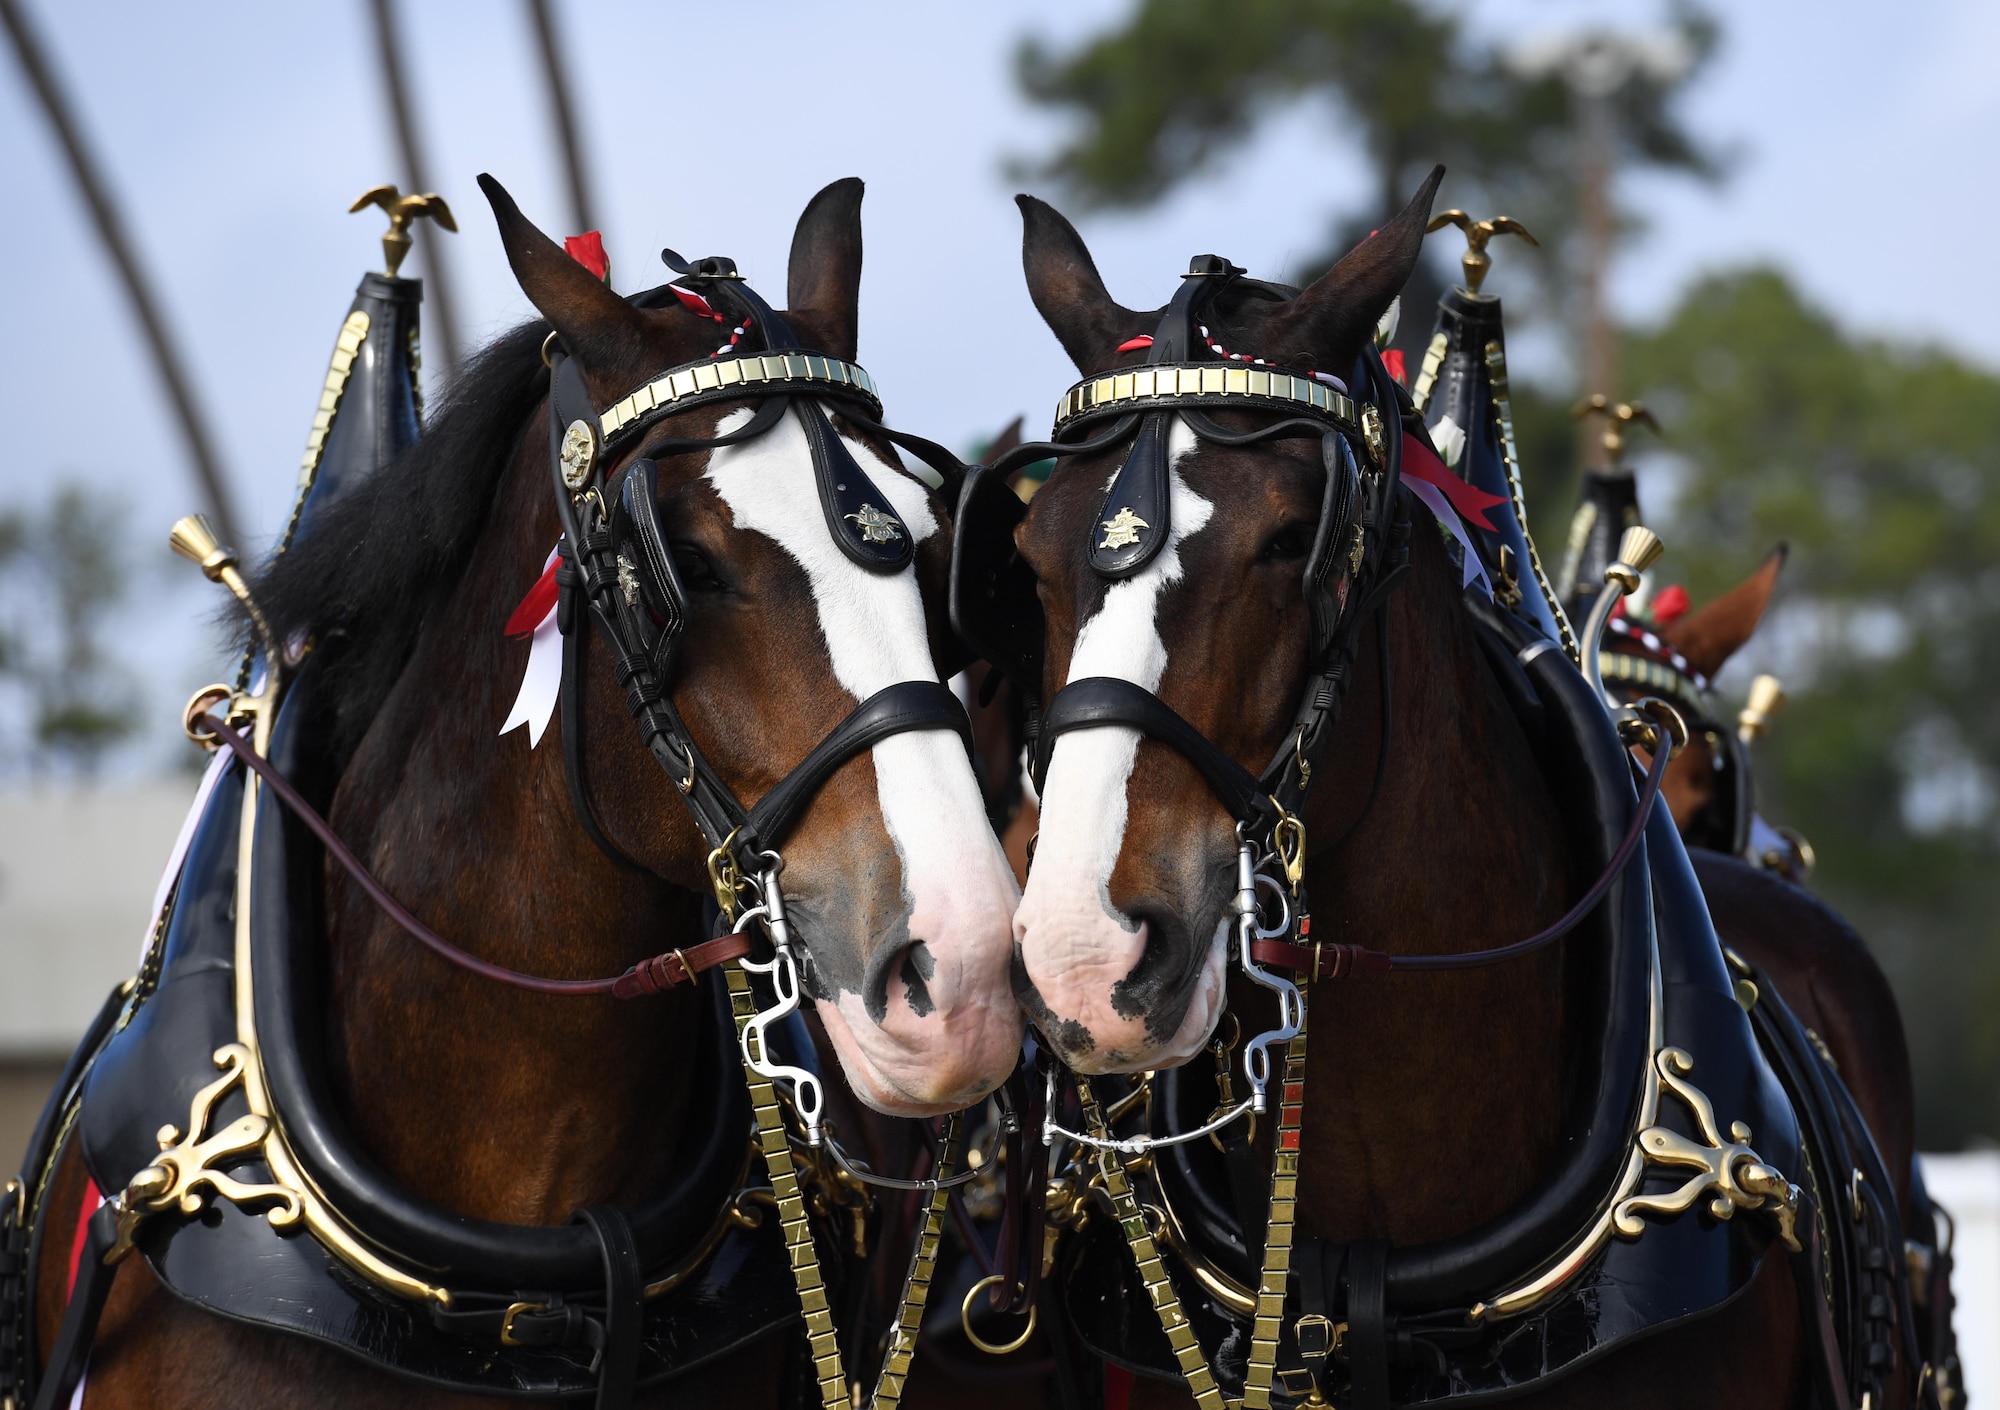 The Budweiser Clydesdales make an appearance at Keesler Air Force Base, Mississippi, Feb. 7, 2019. They made their first appearance in 1933 and have been featured prominently in two presidential inaugurations. The Keesler Base Exchange hosted the event for Airmen and their families to enjoy. (U.S. Air Force photo by Kemberly Groue)